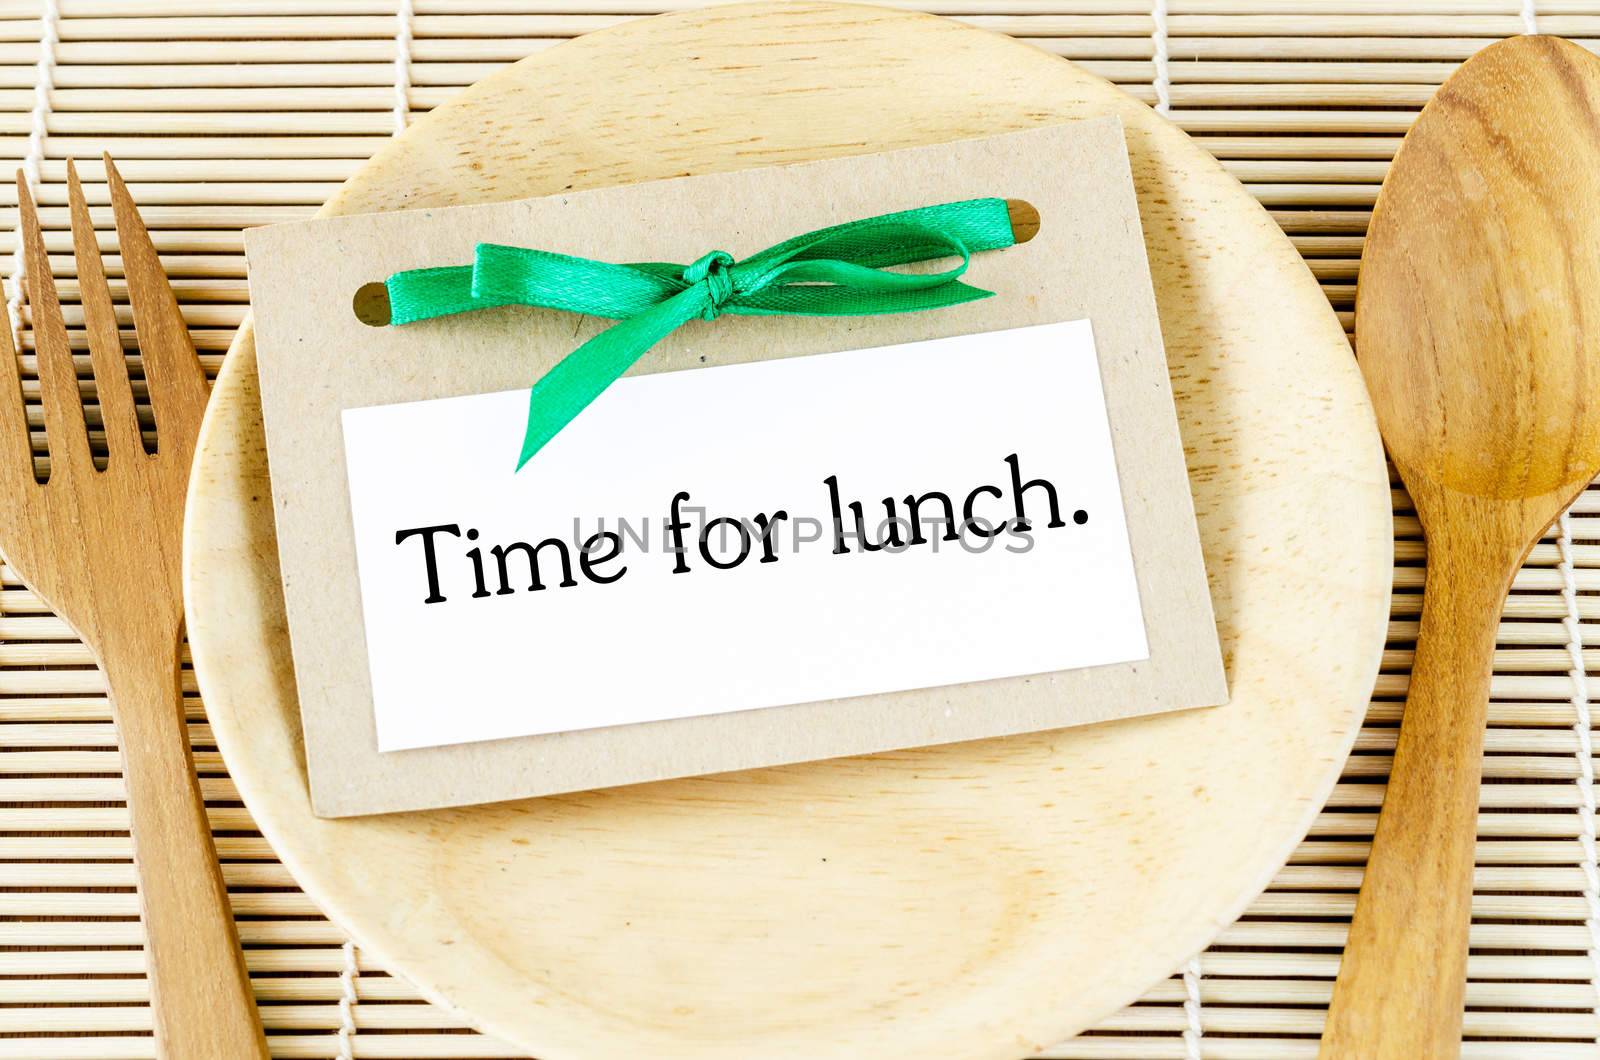 Time for lunch in card on wooden dish and spoon